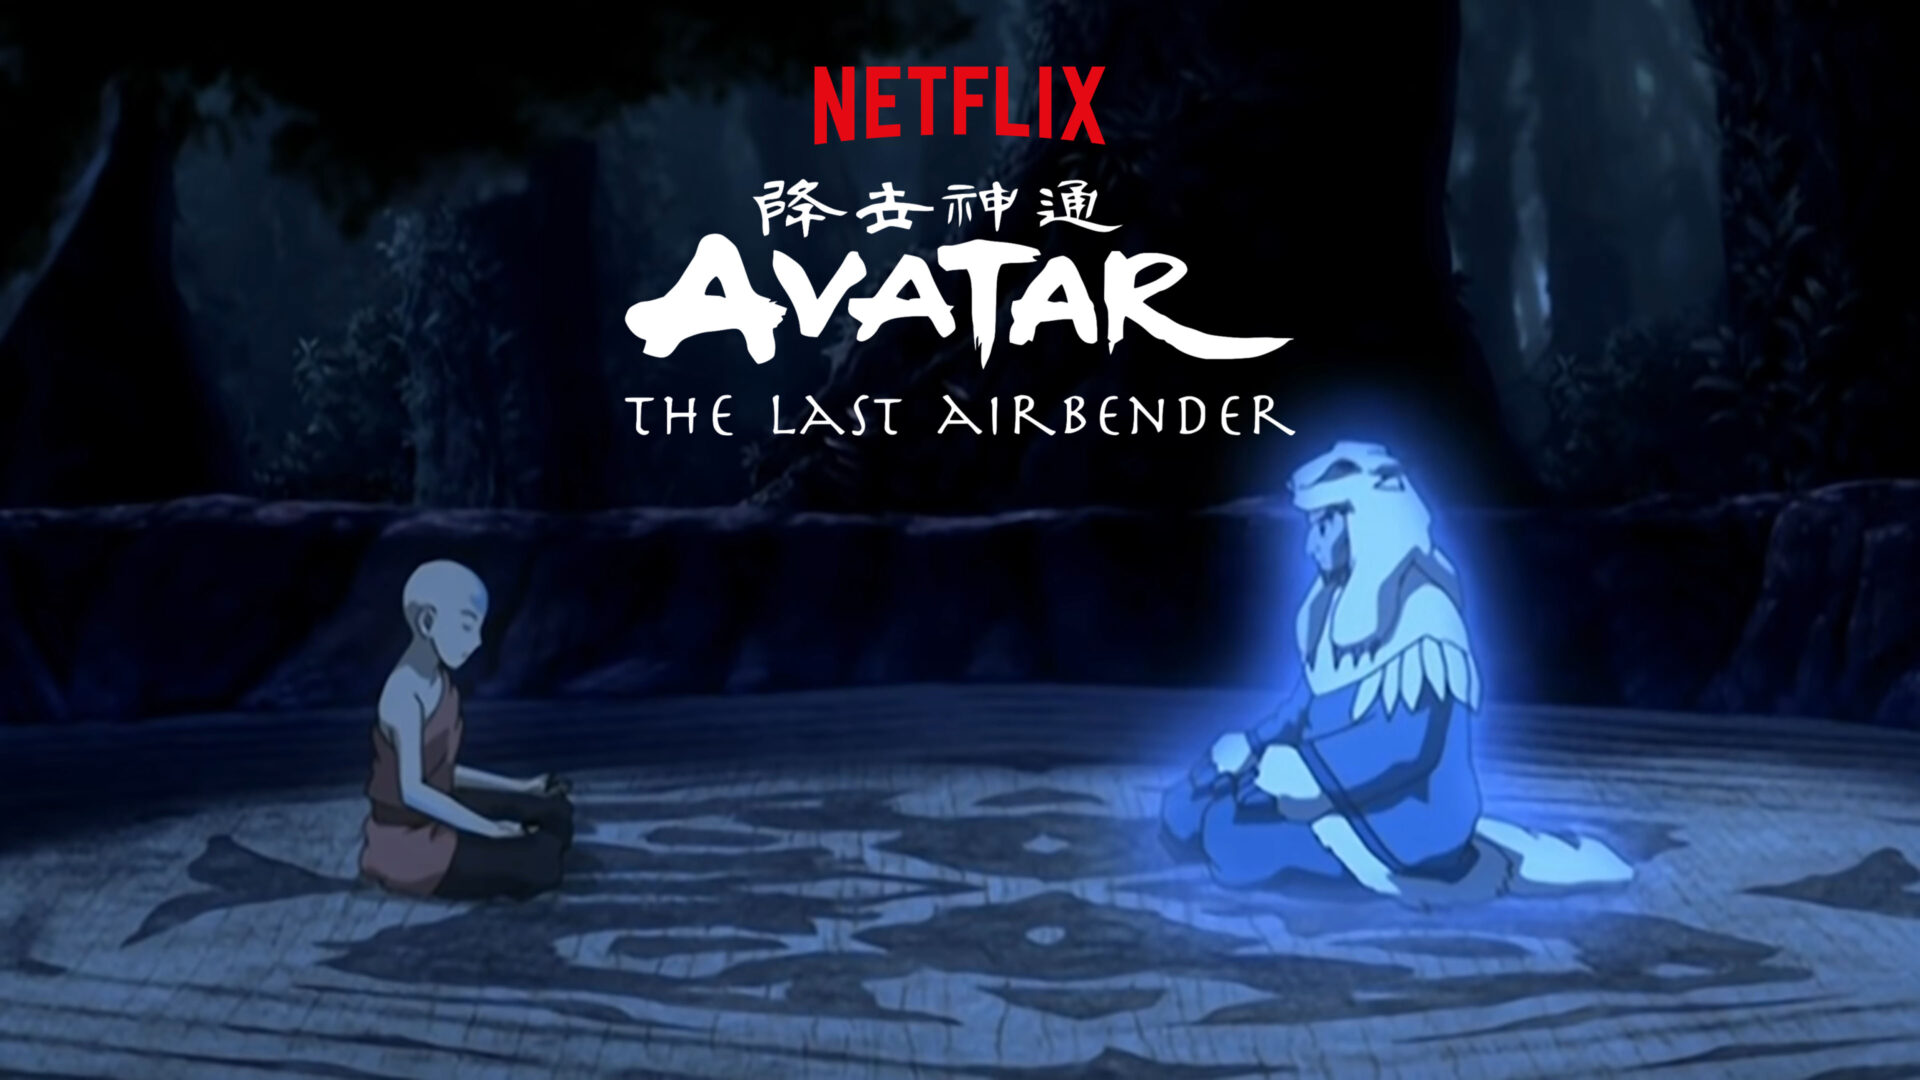 10 episodes of Avatar The Last Airbender to watch on Netflix